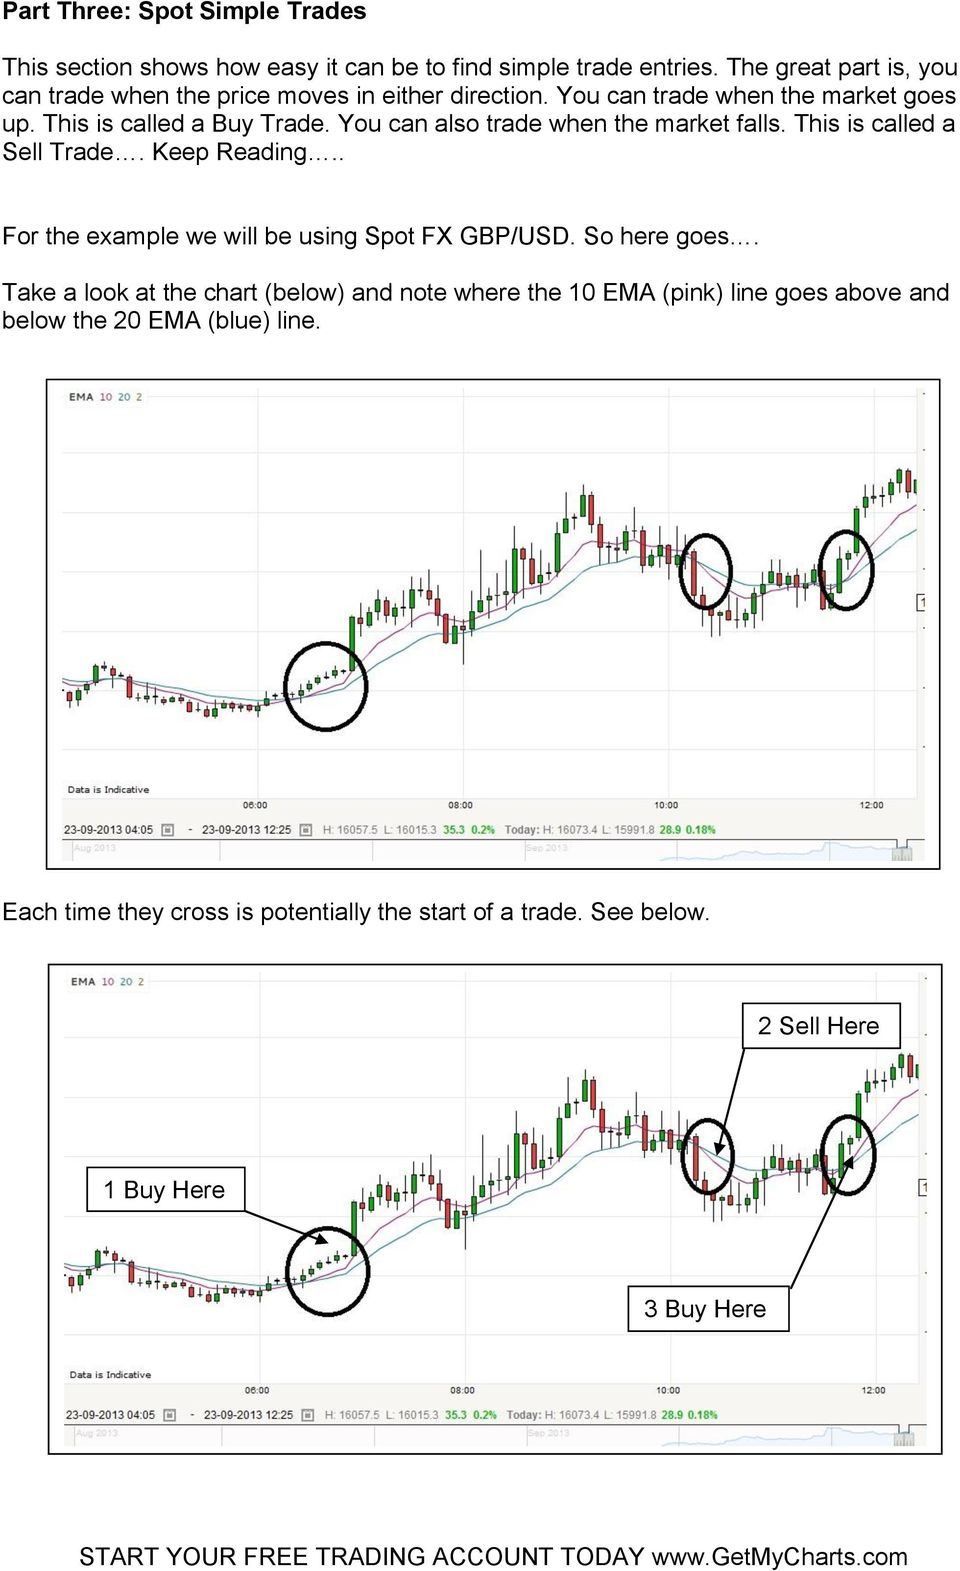 You can also trade when the market falls. This is called a Sell Trade. Keep Reading.. For the example we will be using Spot FX GBP/USD. So here goes.